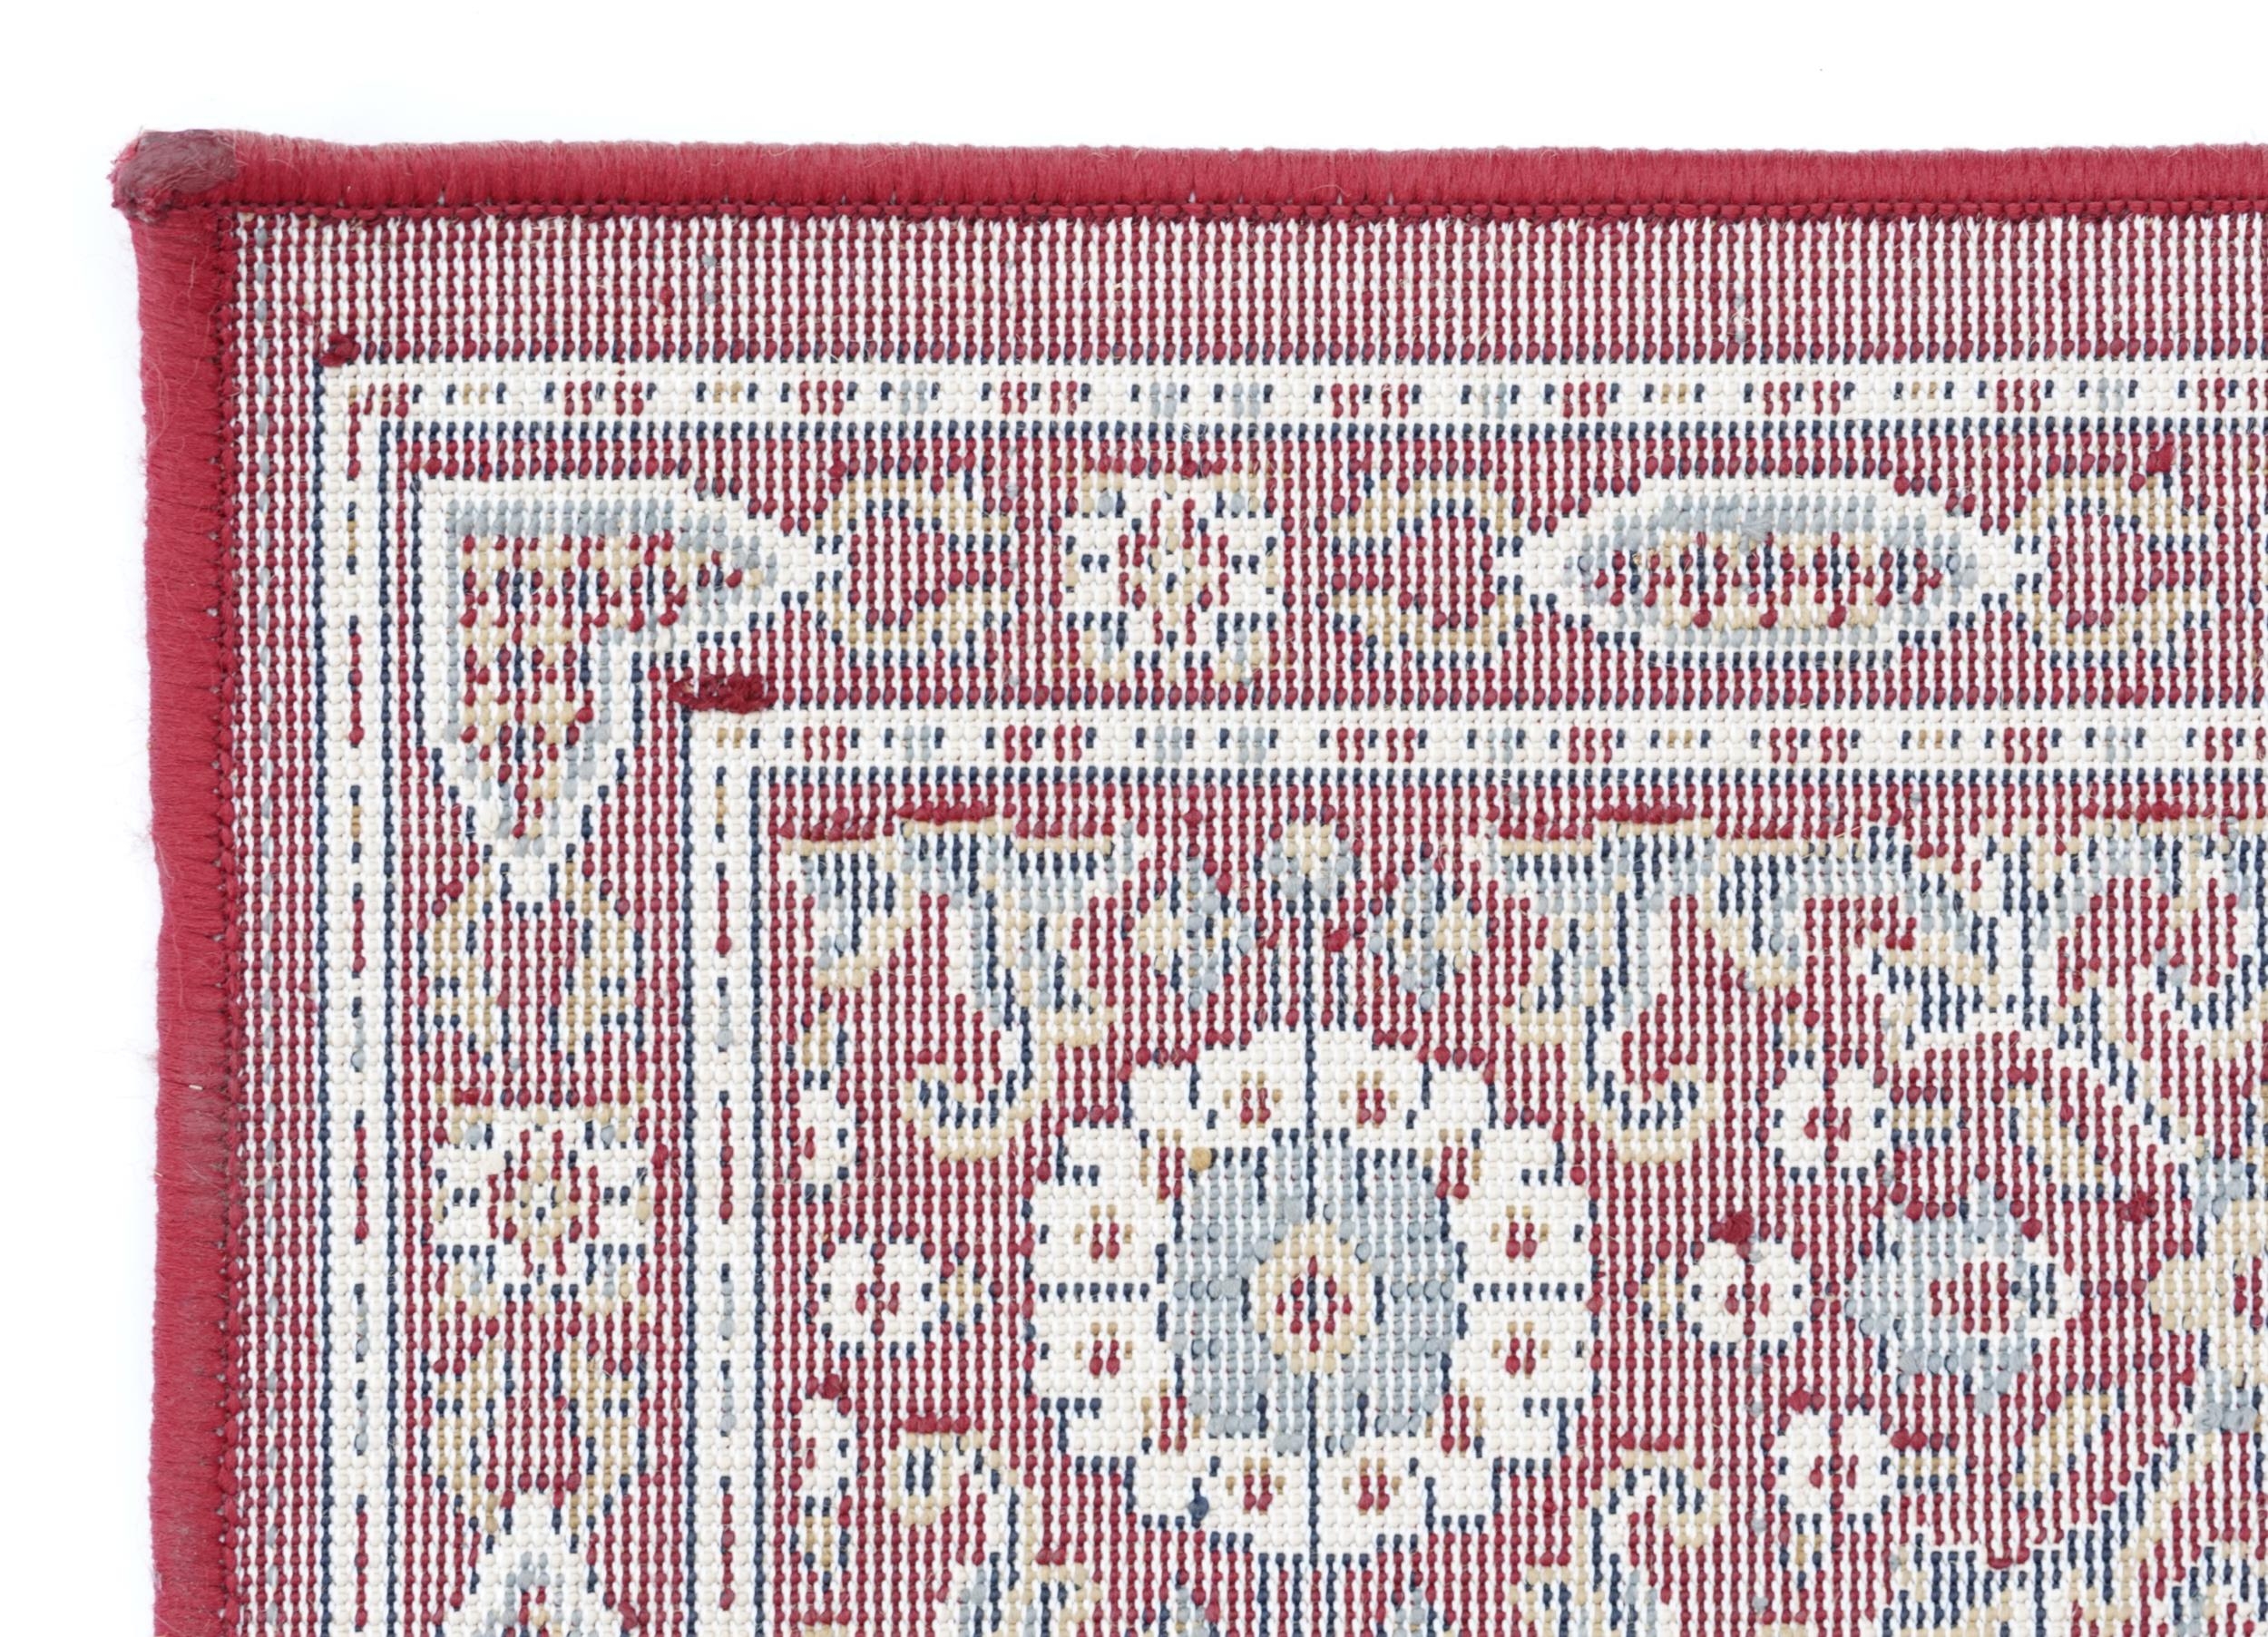 Pair of rectangular Persian style Valby Ruta rugs, each 195cm x 133cm - Image 7 of 13